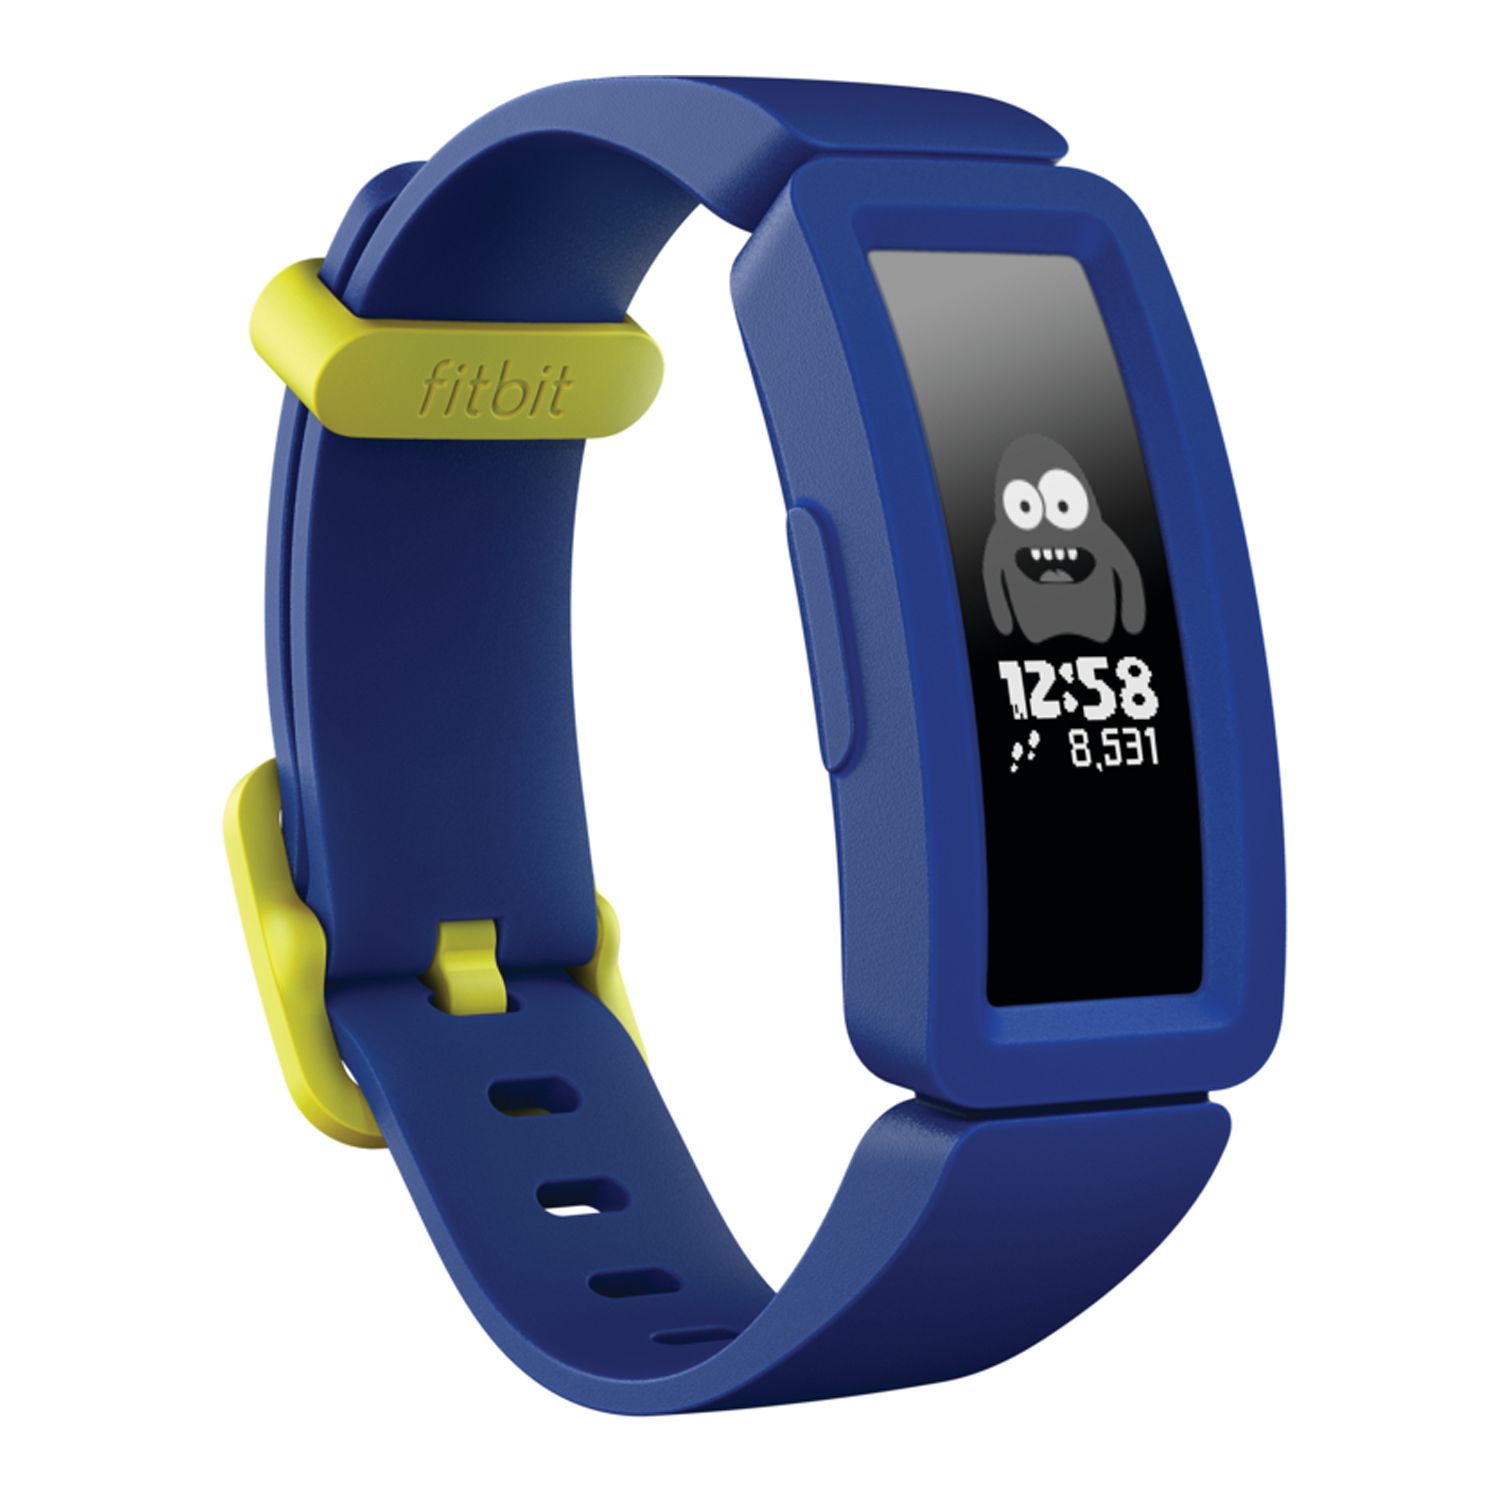 fitbit ace 2 green